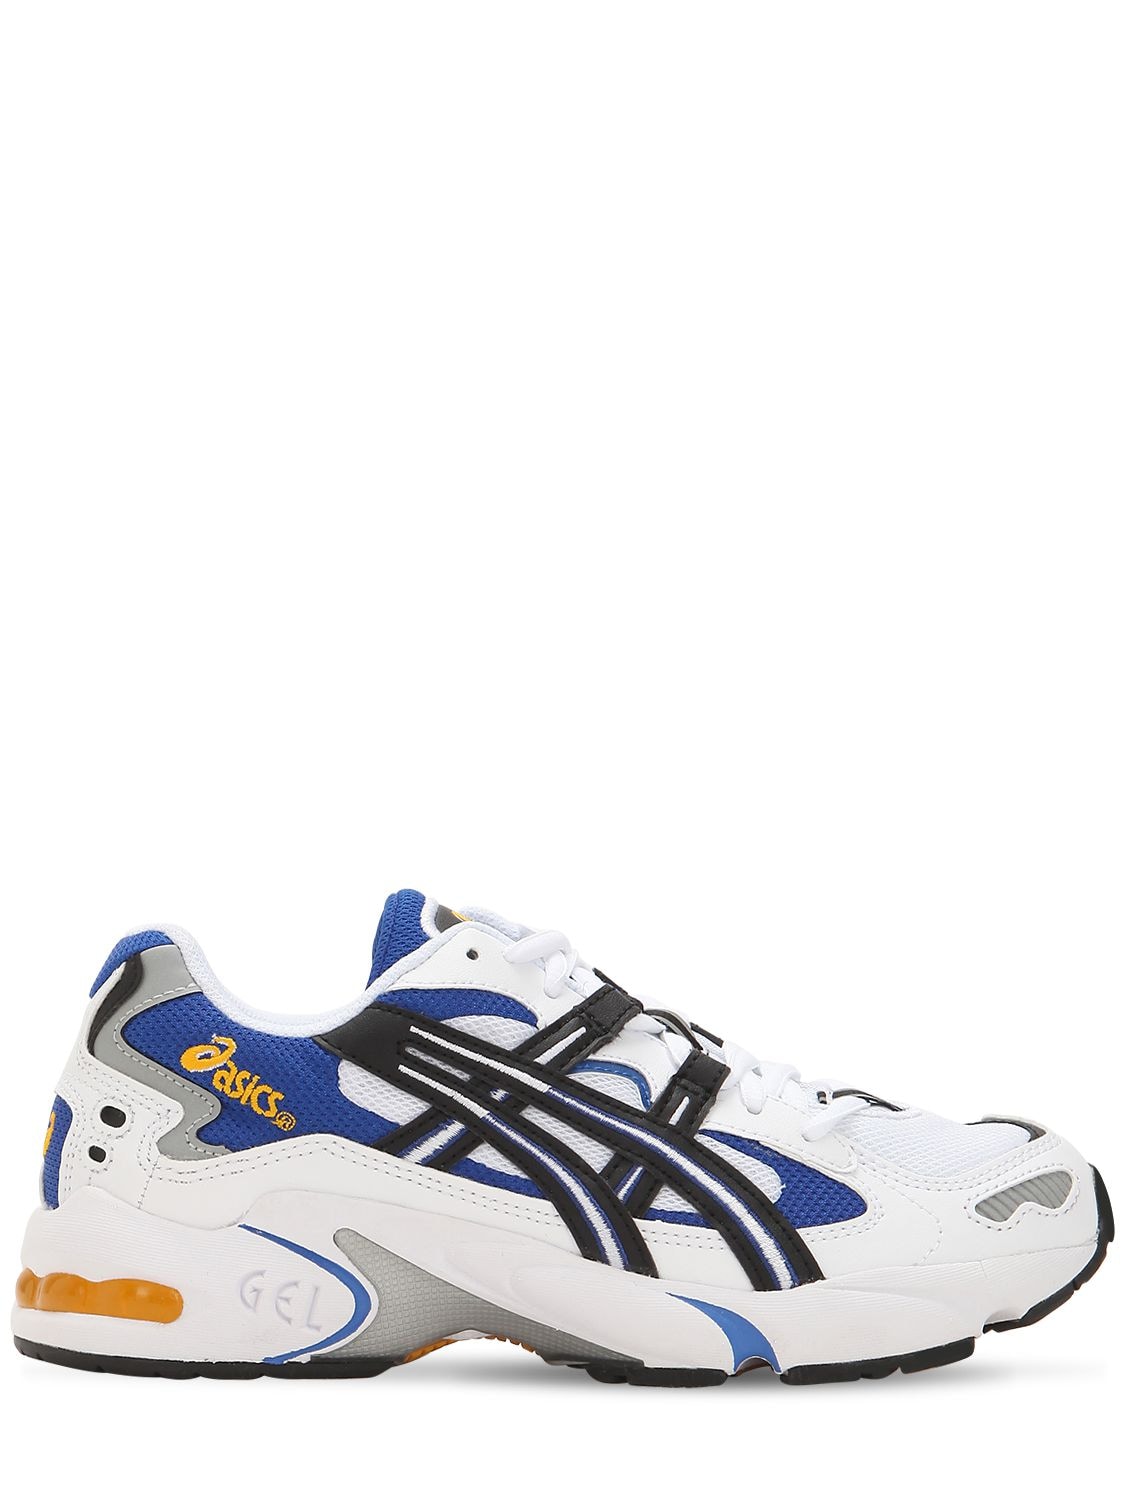 Asics Kayano 5 Og Leather & Mesh Trainers In White